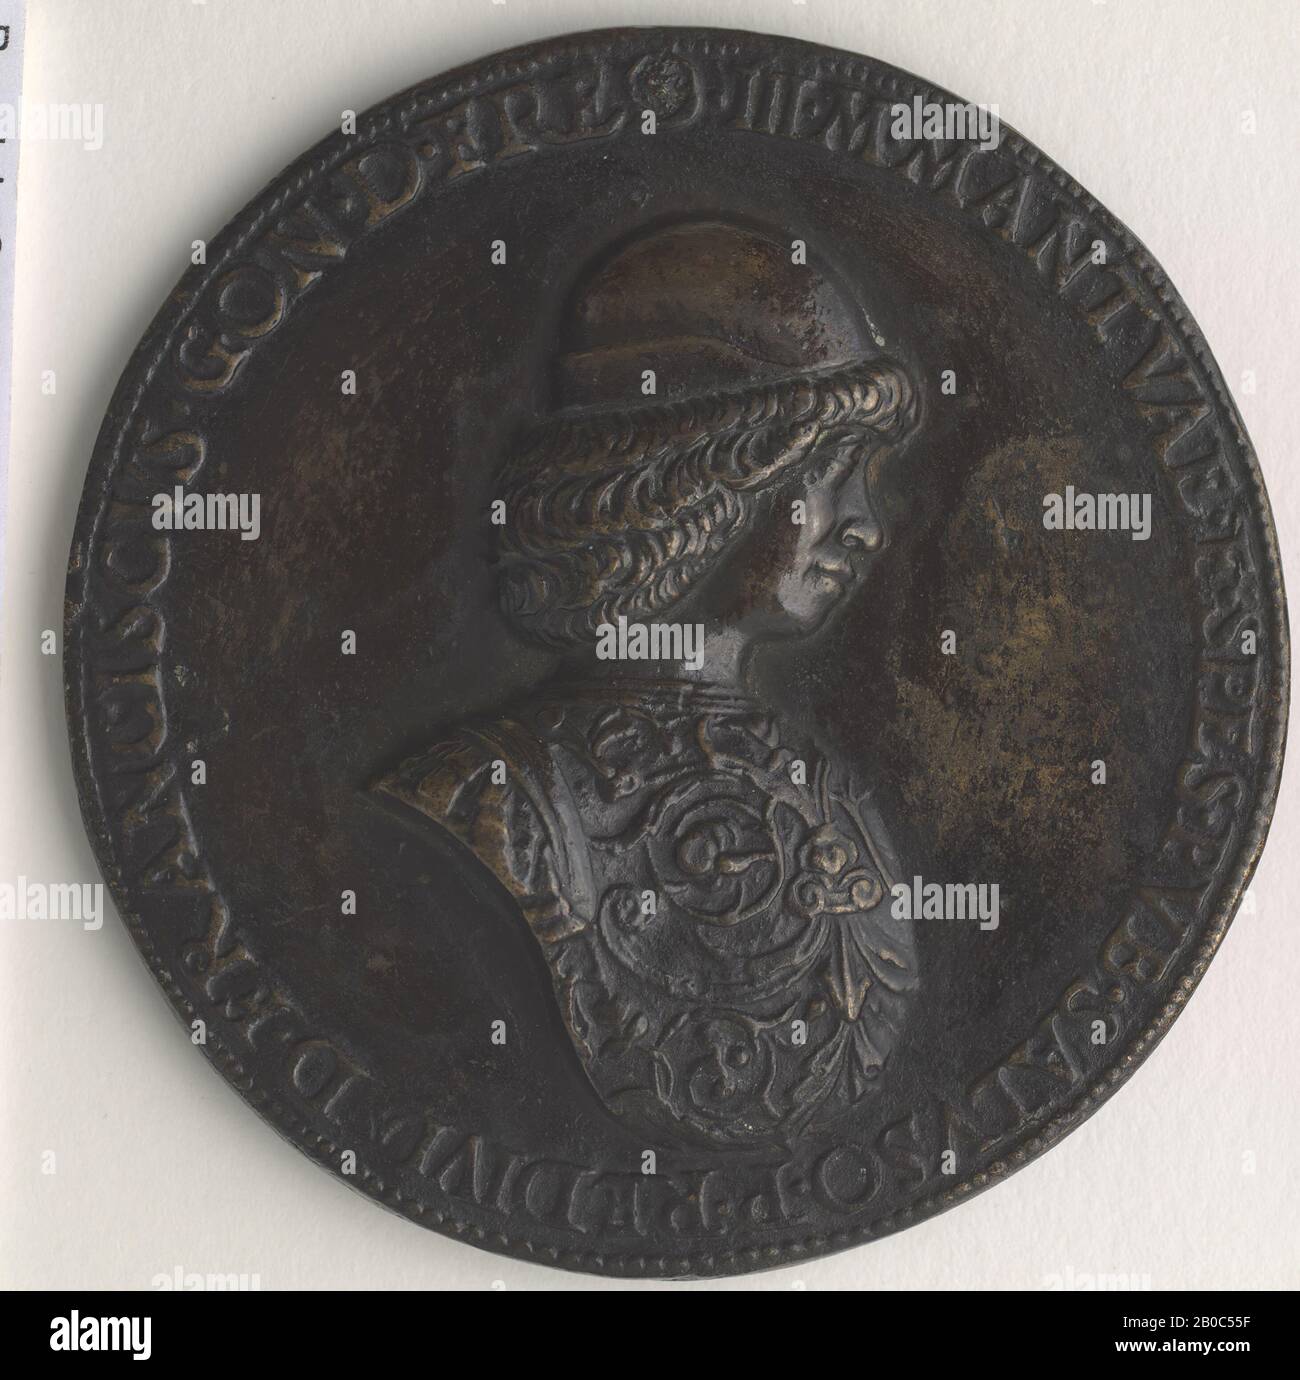 Bartolommeo Melioli, Francesco II Gonzaga (1466-1519), later fourth Marquess of Mantua, 1484, bronze, black patina, 2 13/16 in. (7.1 cm.), This early medal depicts Francesco II Gonzaga (1466-1519), the fourth Marquess of Mantua. A personification of Prudence holding a muzzle (a Gonzaga family device) is on the reverse, perhaps presenting the teenage Francesco with an important lesson: govern with the virtues of restraint and self-control. As the popularity of medals spread into Northern Italy during the latter half of the fifteenth century, schools of medalists formed in major urban centers wh Stock Photo